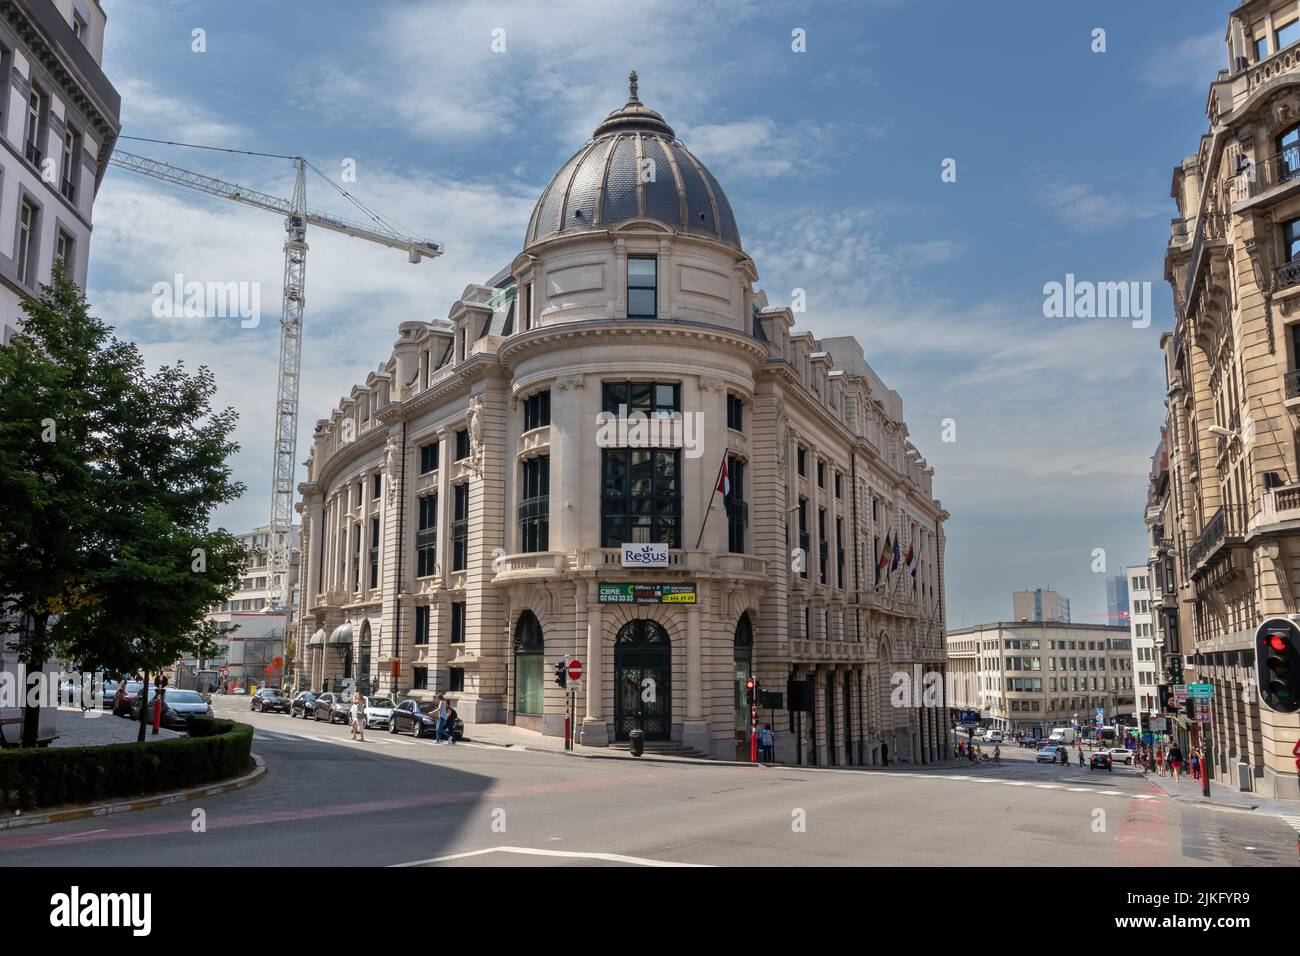 Brussels, Belgium - July 13, 2018: Historical architecture at the intersection of Rue des Colonies and Rue de la Chancellerie Stock Photo